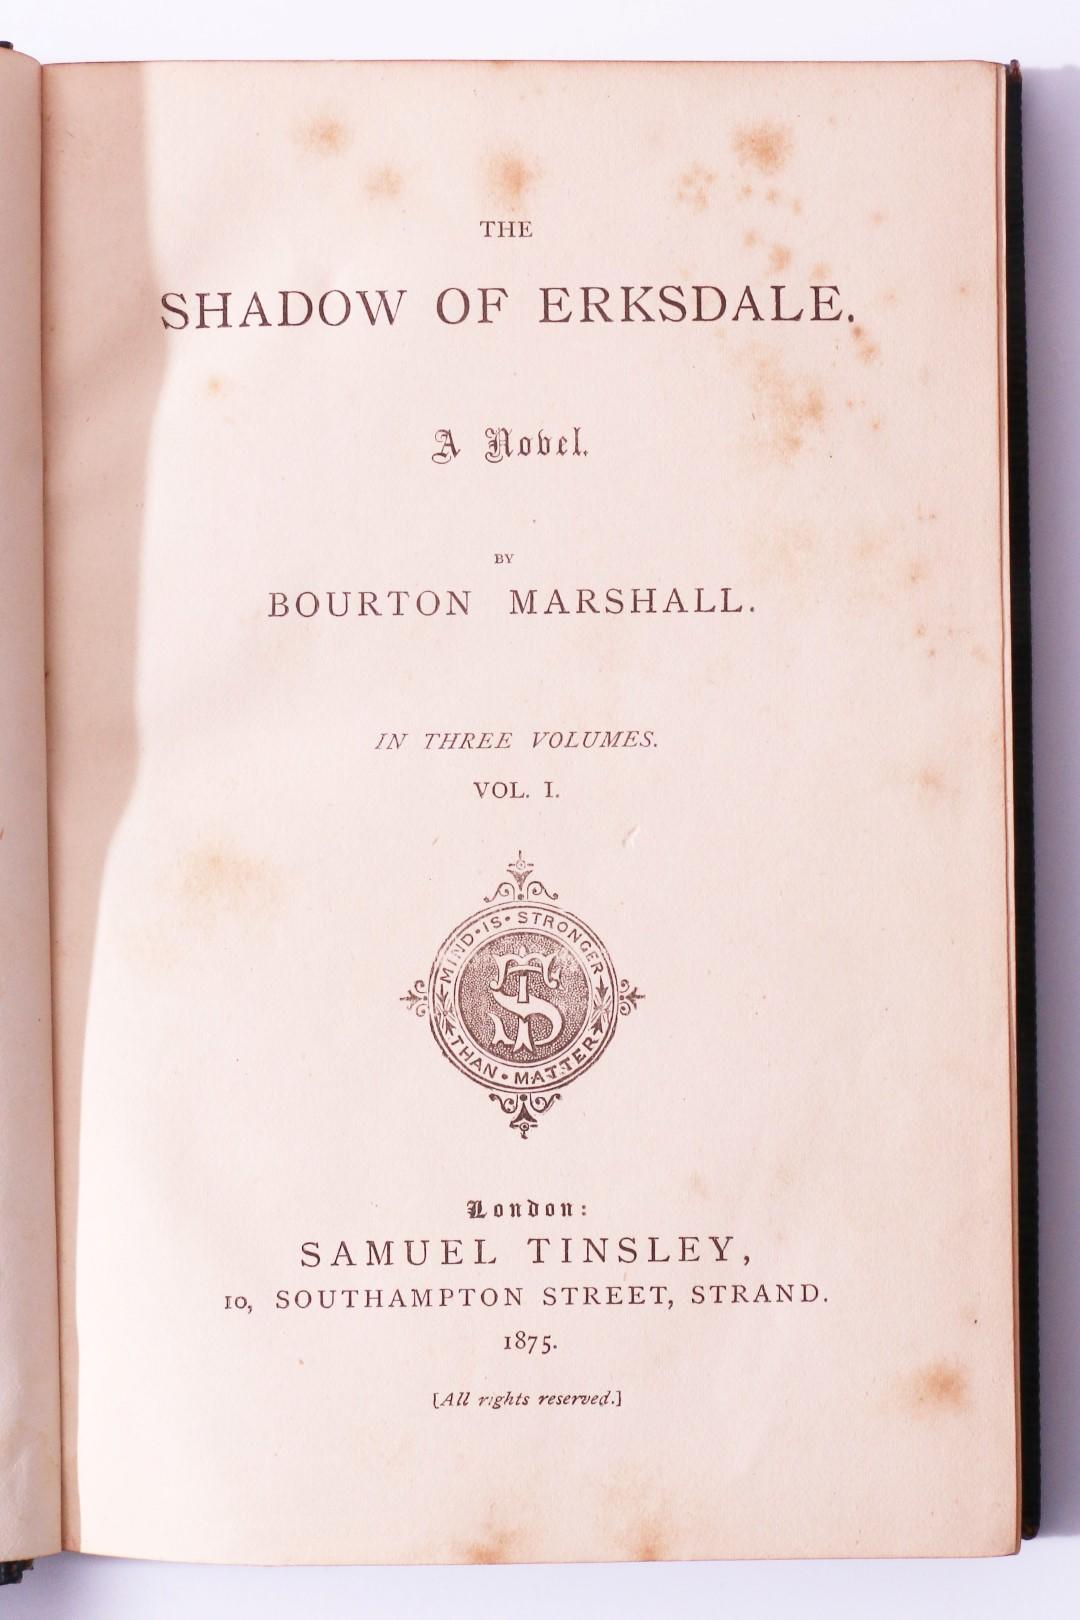 Bourton Marshall - The Shadow of Erksdale - Samuel Tinsley, 1875, Signed First Edition.